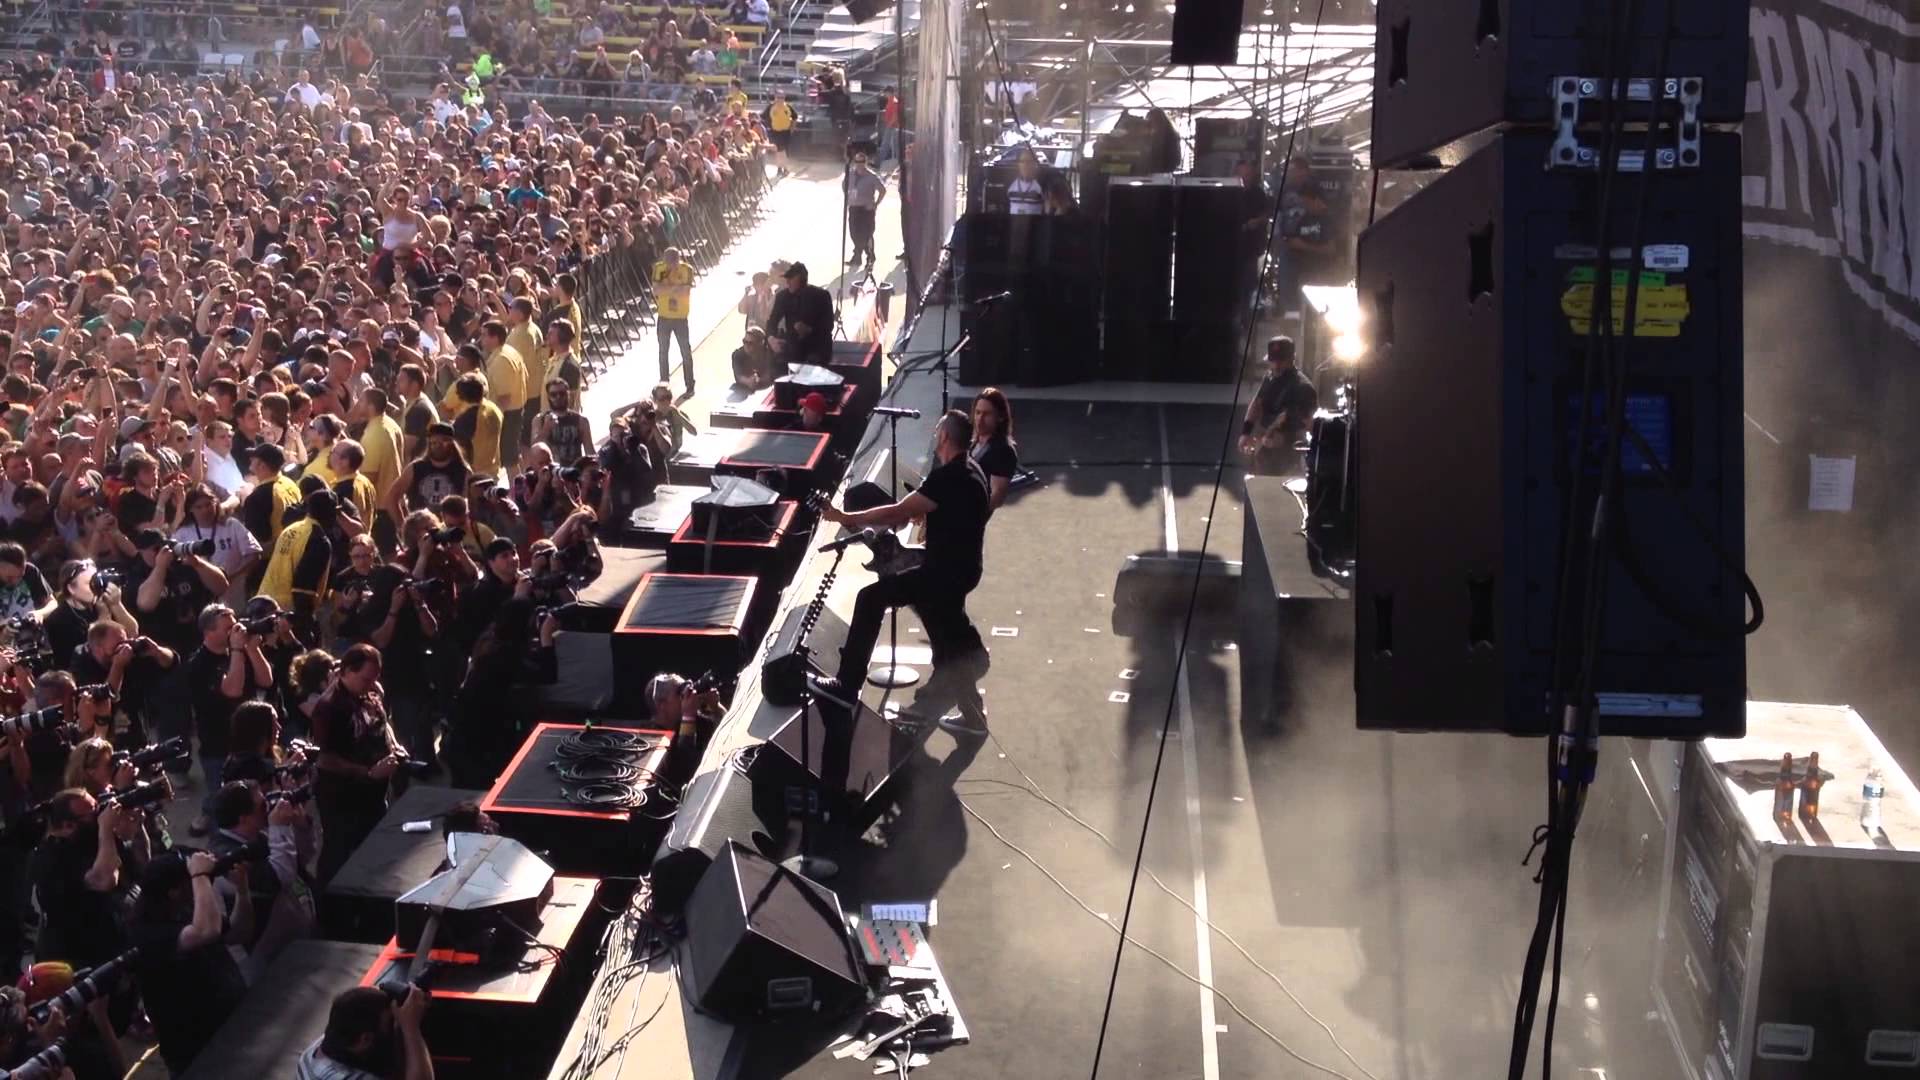 Alter Bridge - Addicted to Pain - Live at Rock on the Range, 2014